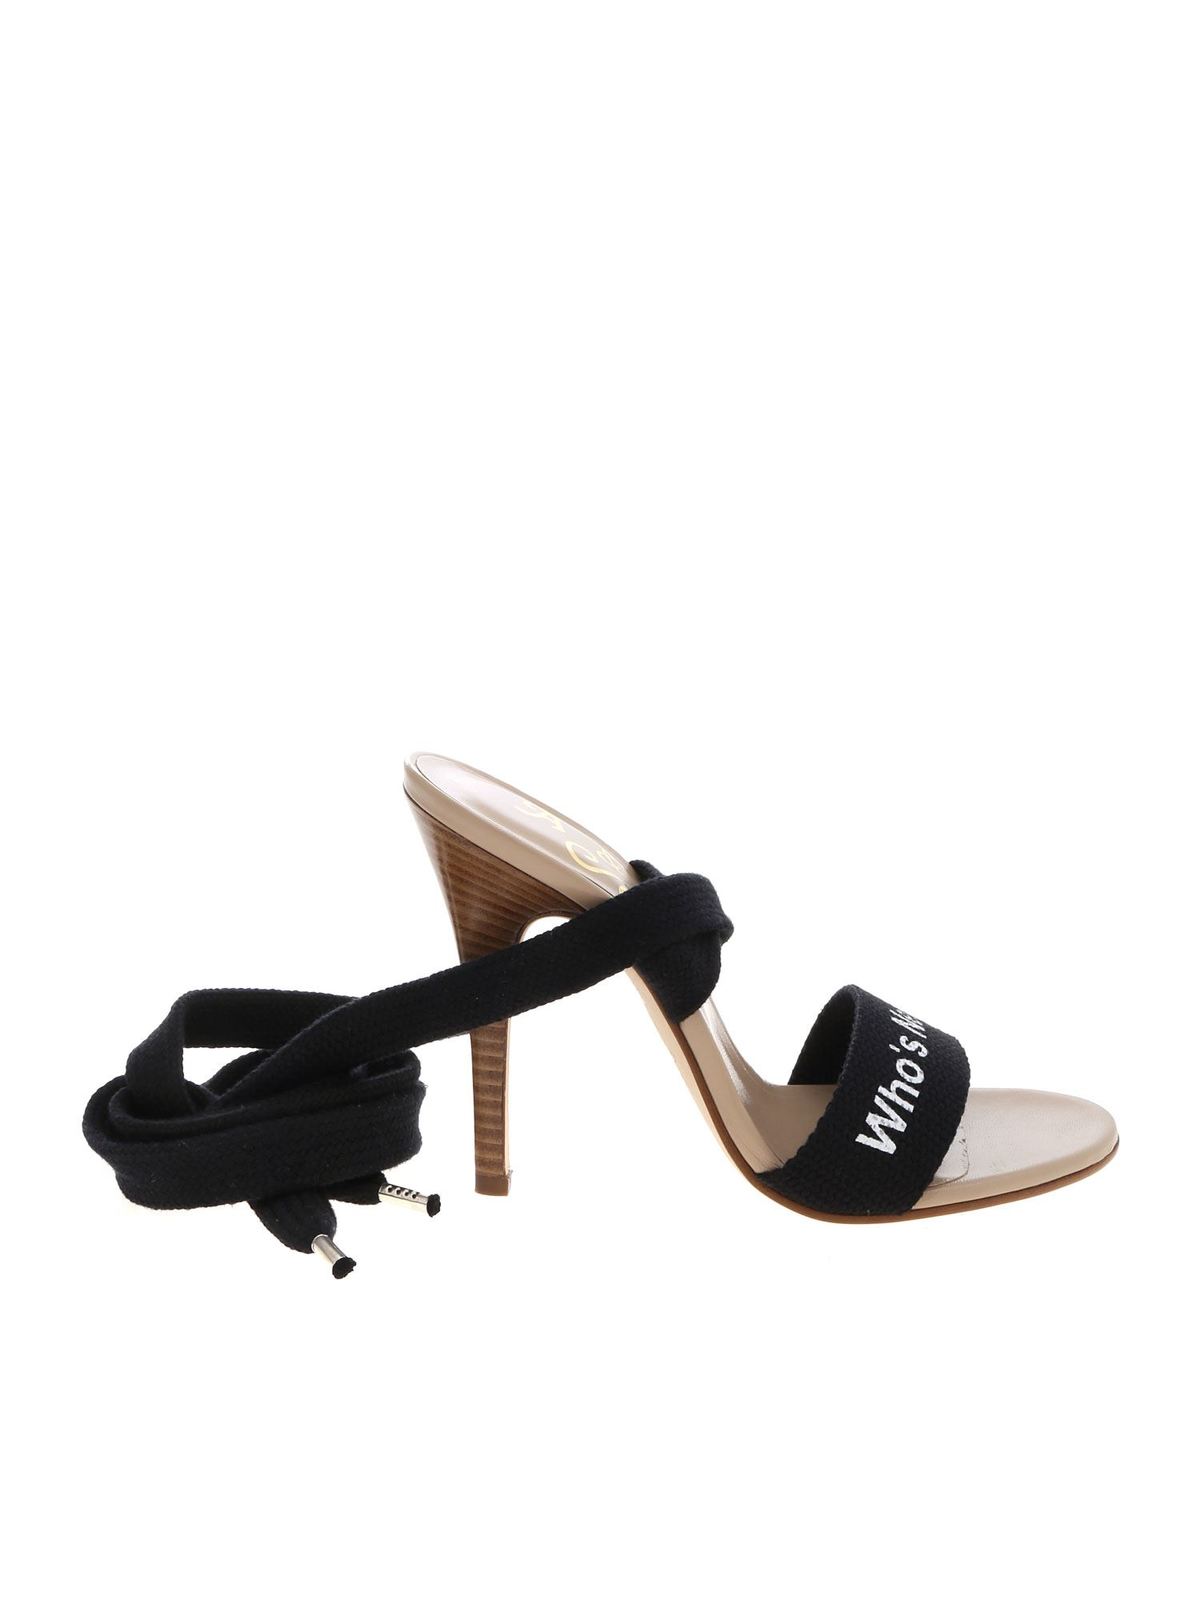 Vivienne Westwood Holiday Sandals In Gray And Black In Negro